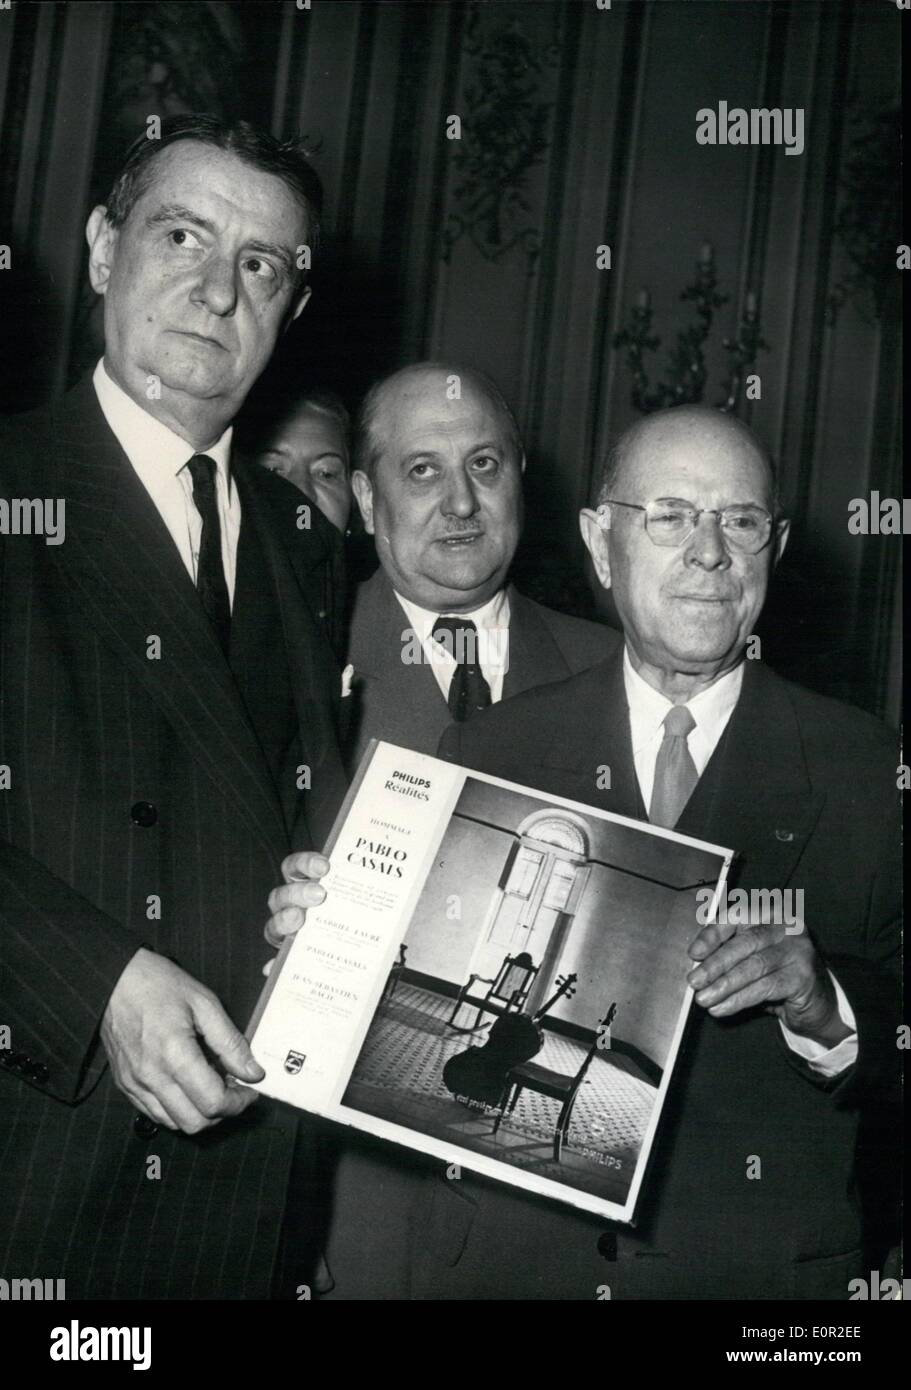 Oct. 10, 1957 - Pablo Casals presented with his best record,: Pablo Casals, the famous Cellist, was presented with the record of the rehearsal of his 80th birthday concert at a ceremony held at Musee Jacquemart -Andre, Paris today. Photo shows Pablo Casals receives the record from Georges Auric, the famous composer Stock Photo